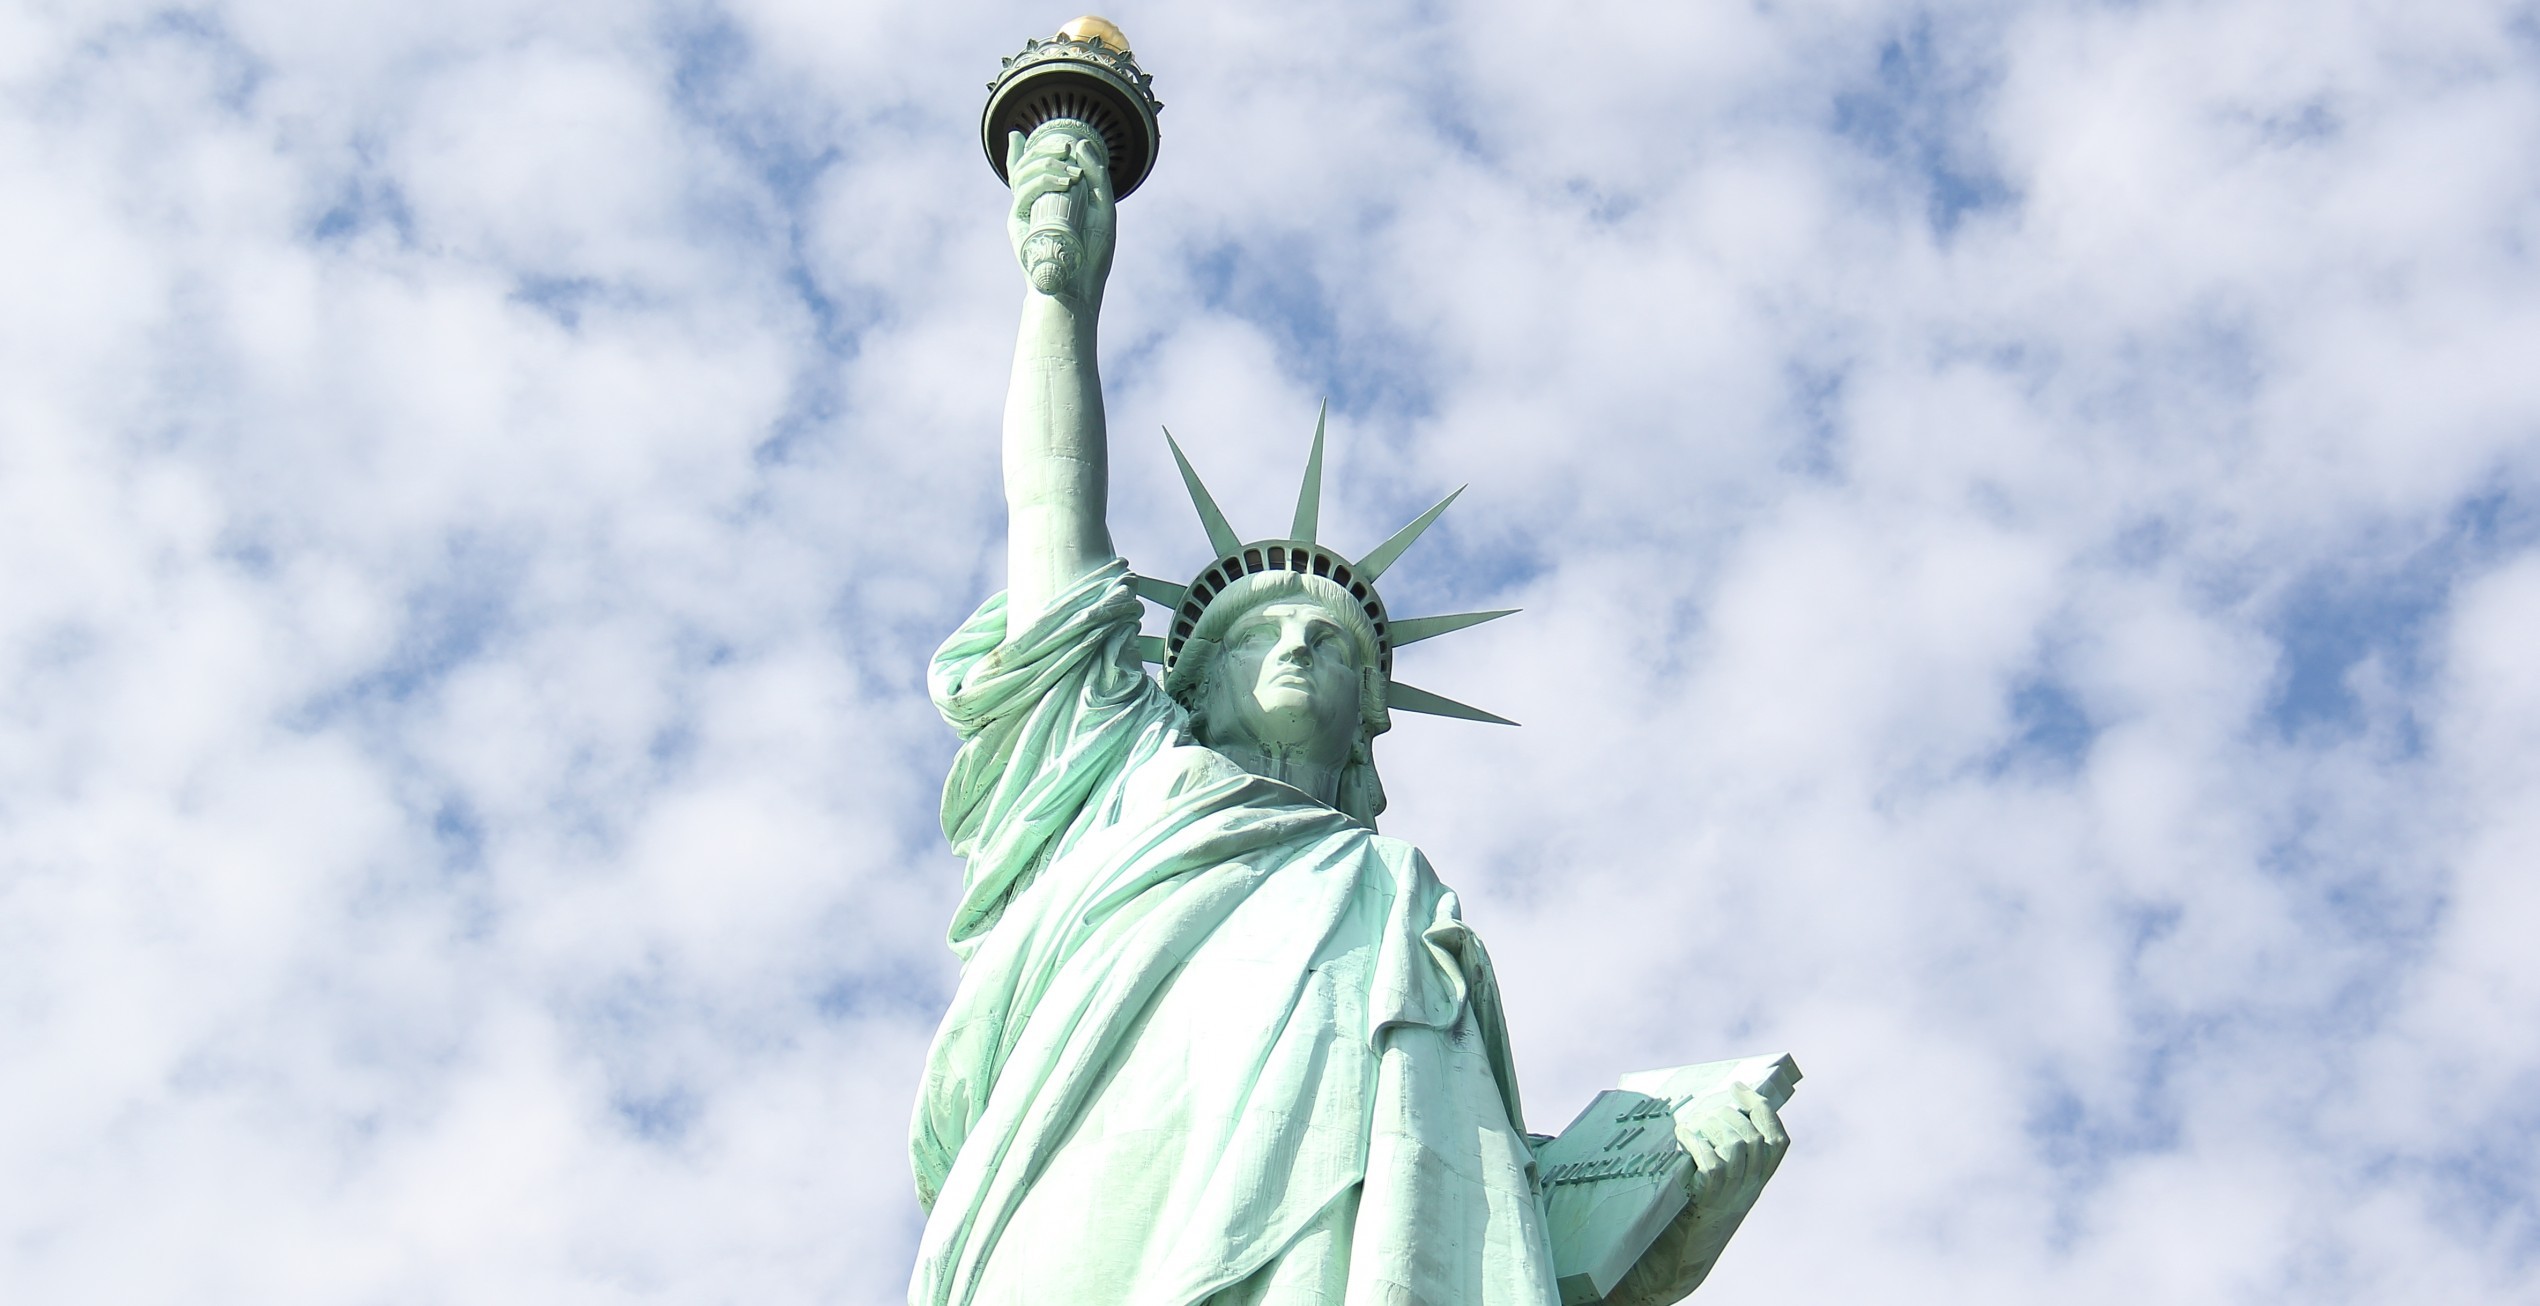 THE STATUE OF LIBERTY EXPERIENCE | Statue Cruises